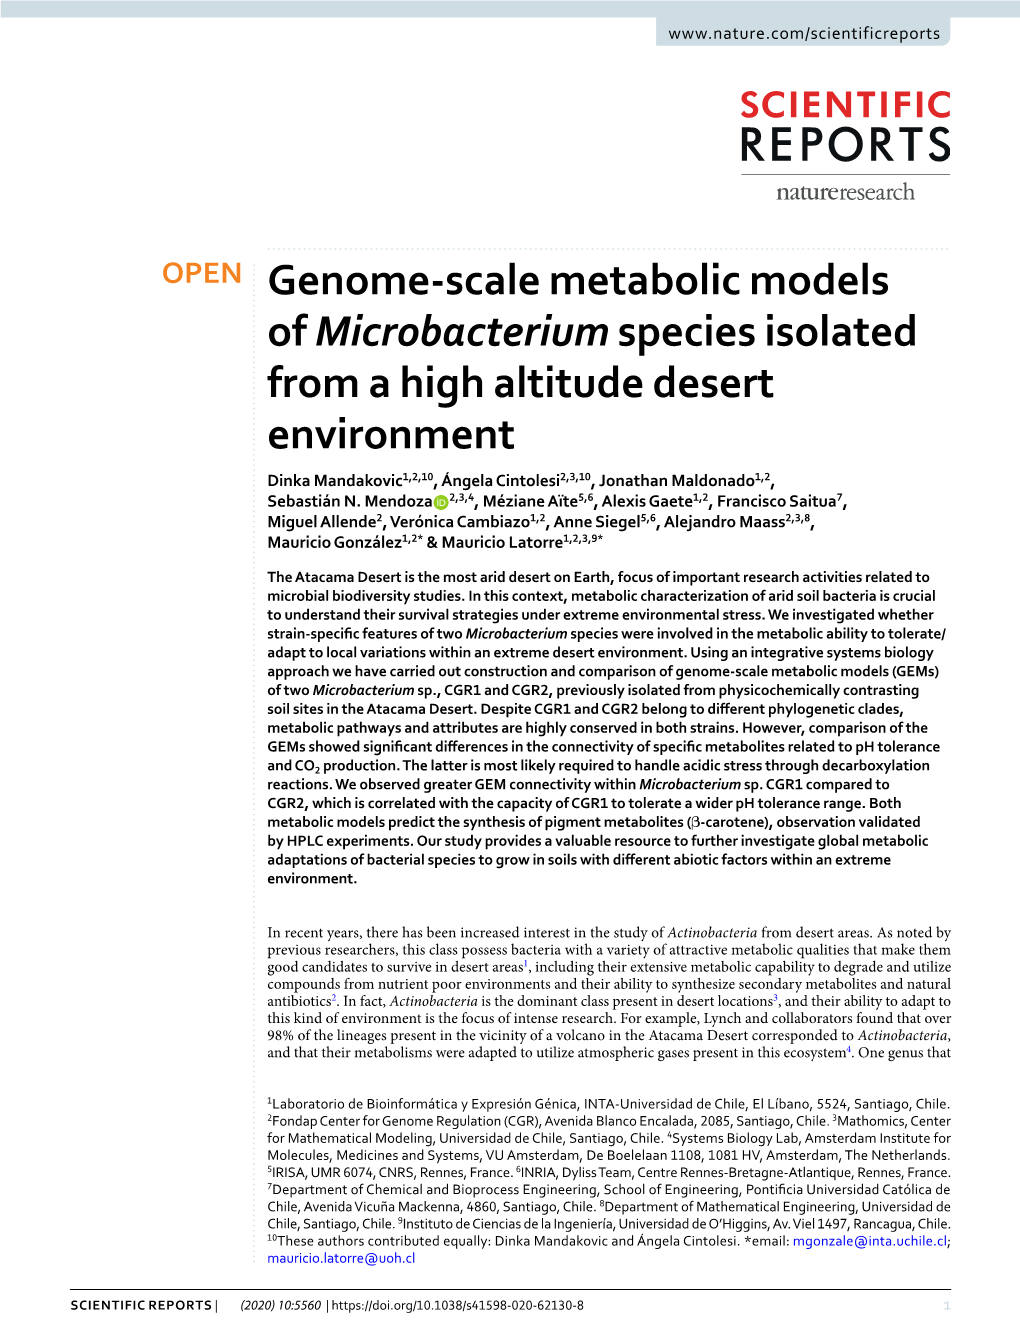 Genome-Scale Metabolic Models of Microbacterium Species Isolated